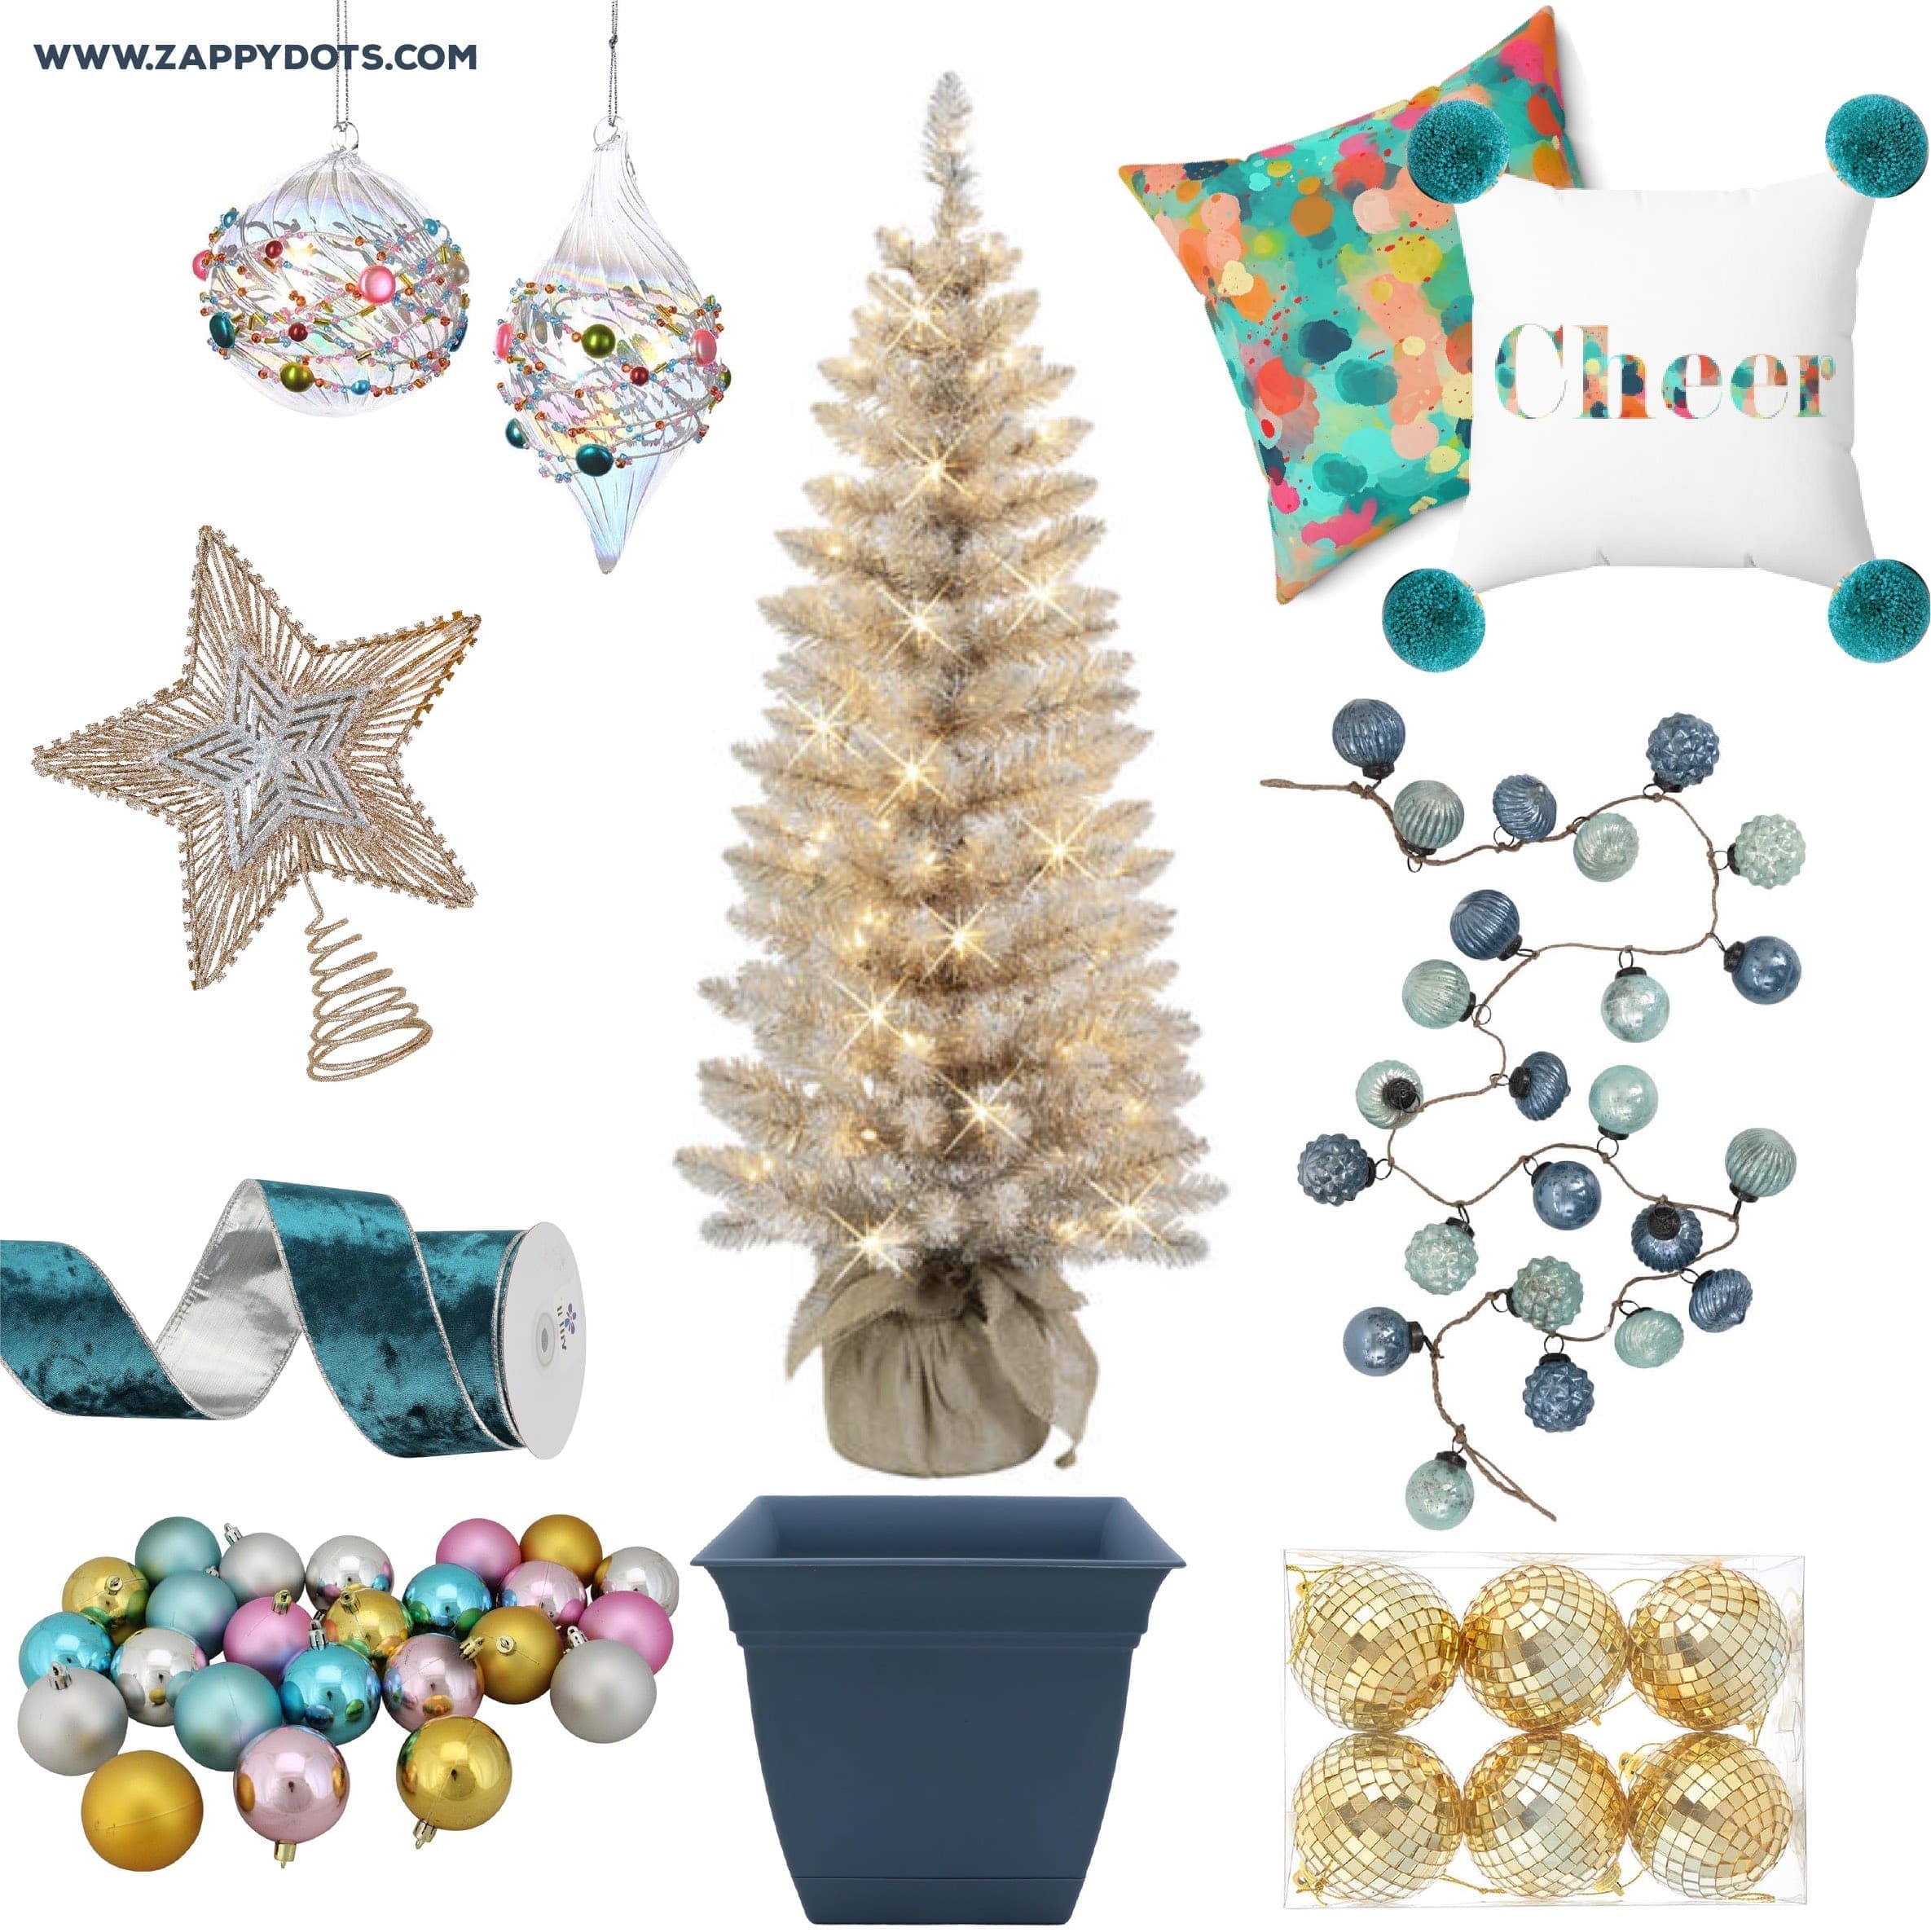 4 Creative Outdoor Christmas Tree Themes to Spruce Up Your Front Porch